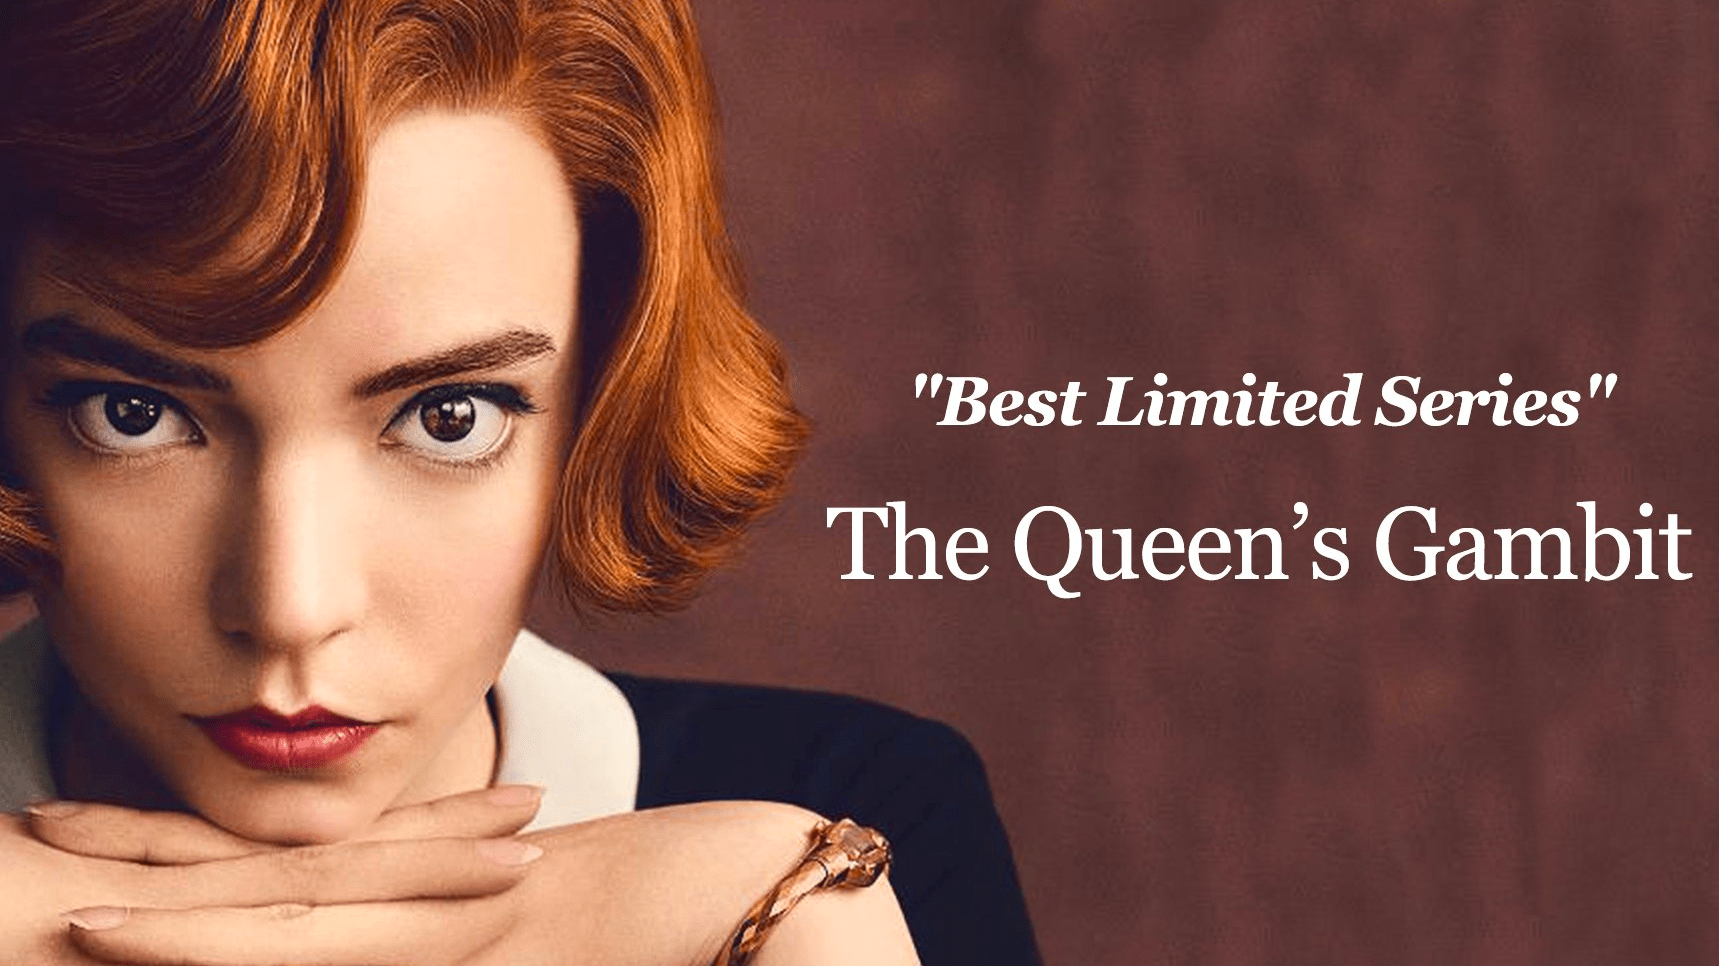 The Queen's Gambit Cast, News, Videos and more